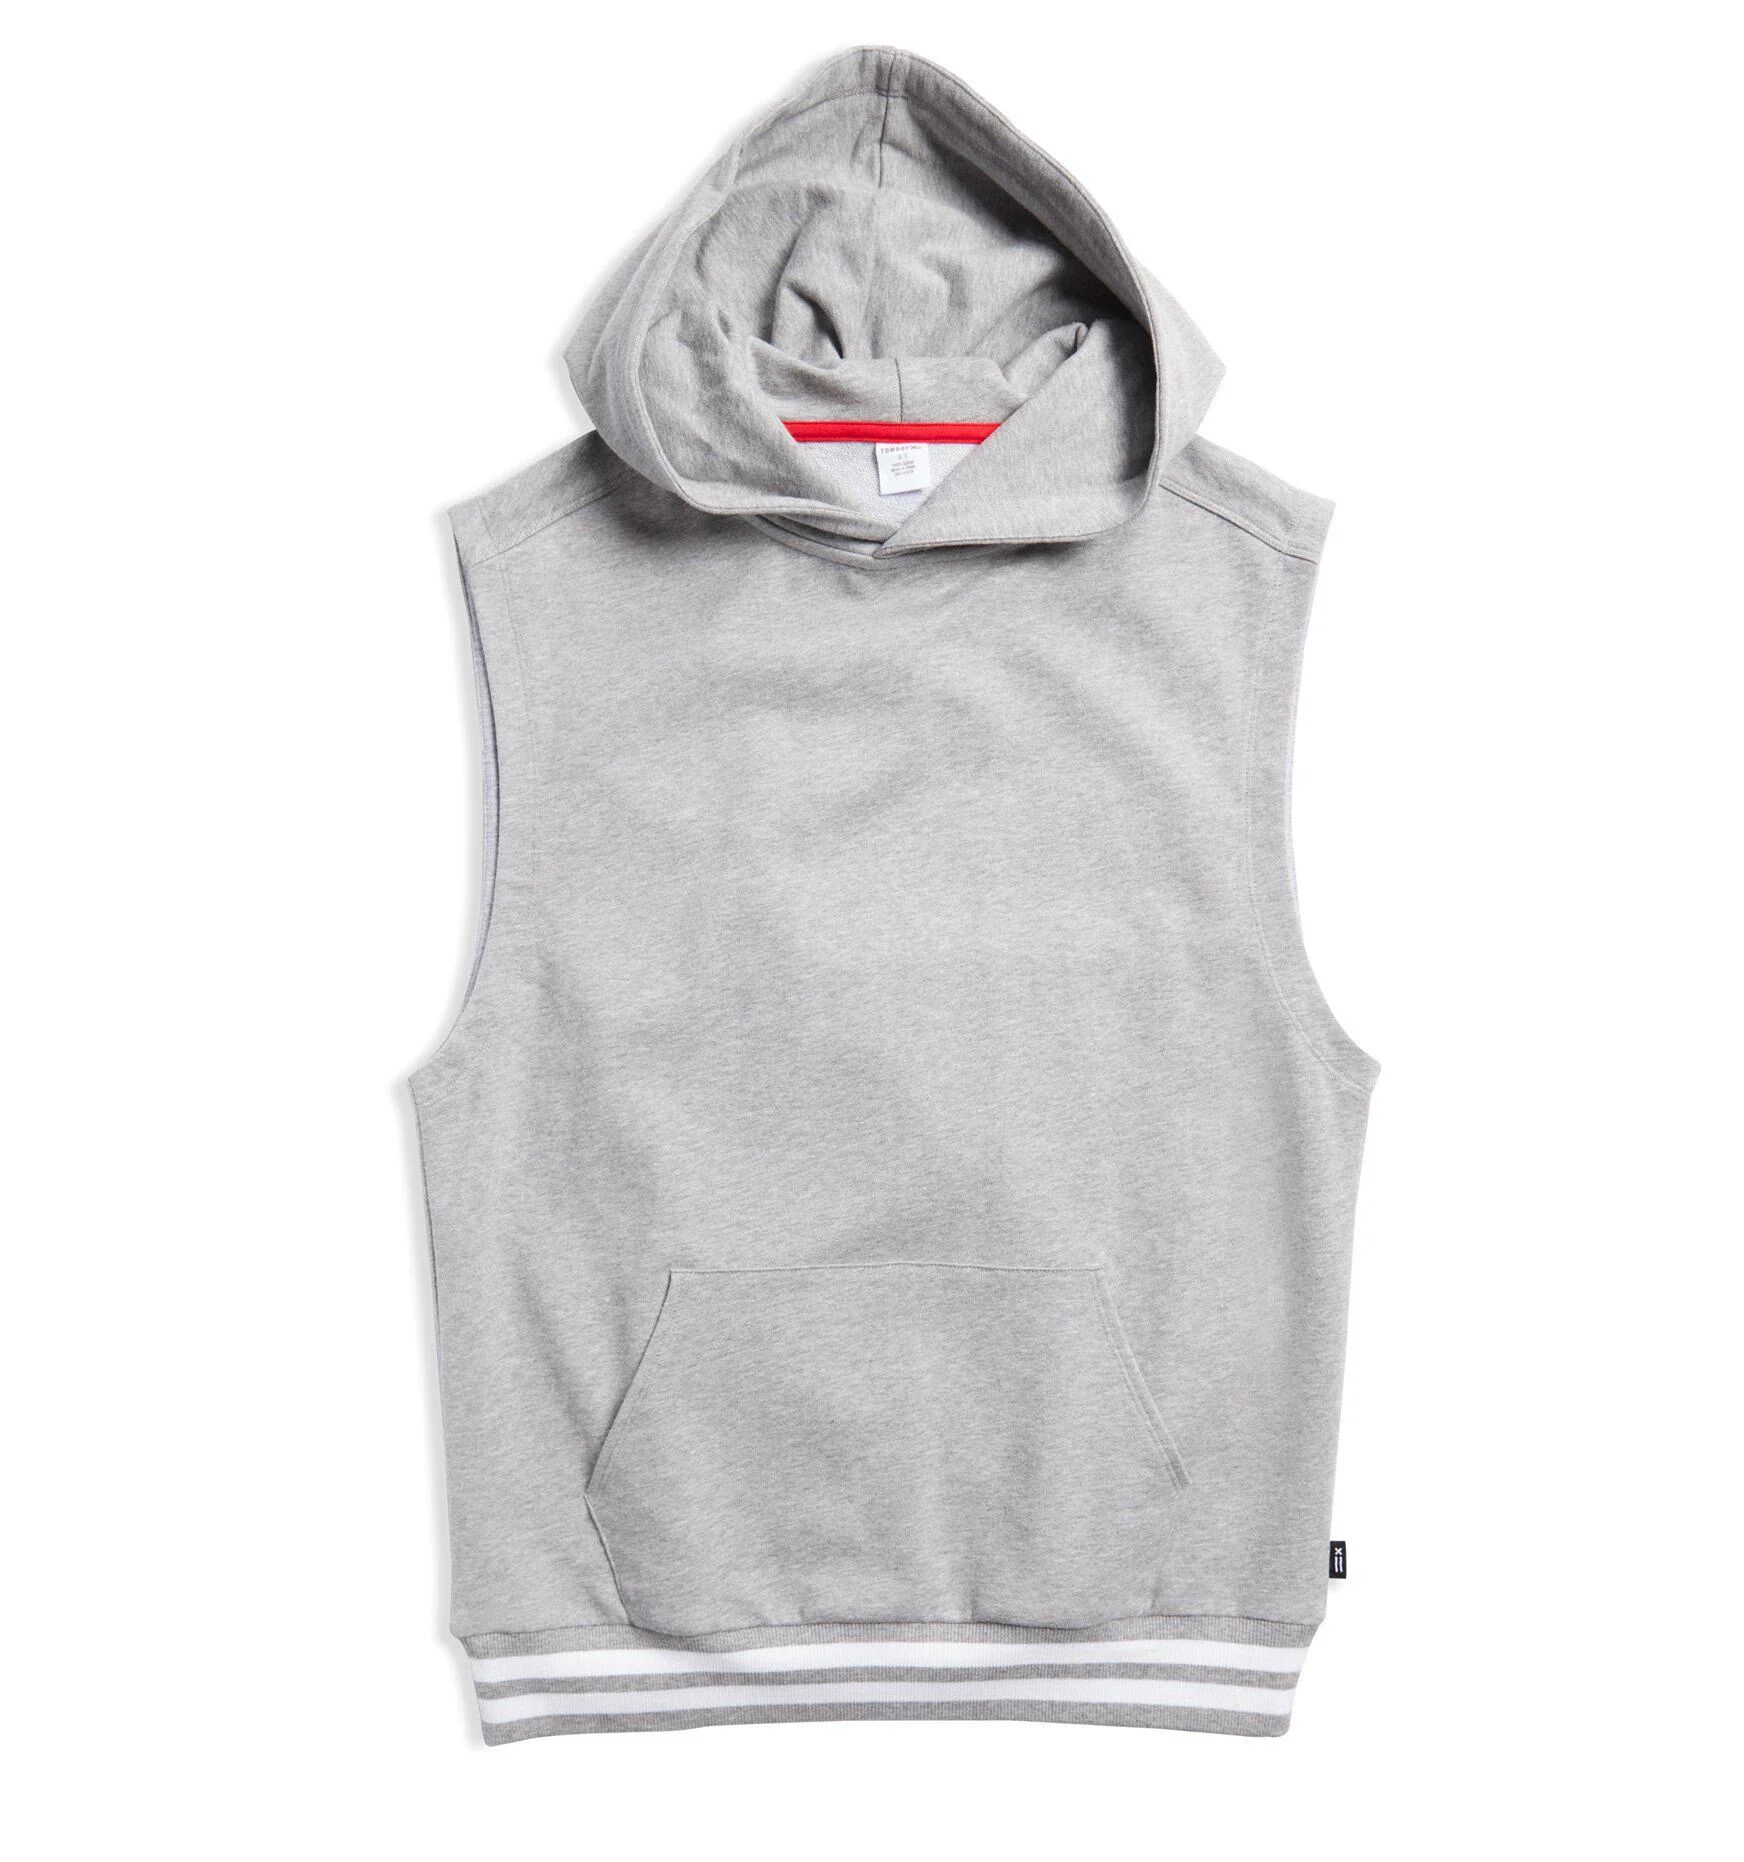 TomboyX French Terry Sleeveless Hoodie LC - Heather Gray with Striped Rib - Heather Grey with Striped Rib - Size: 4X